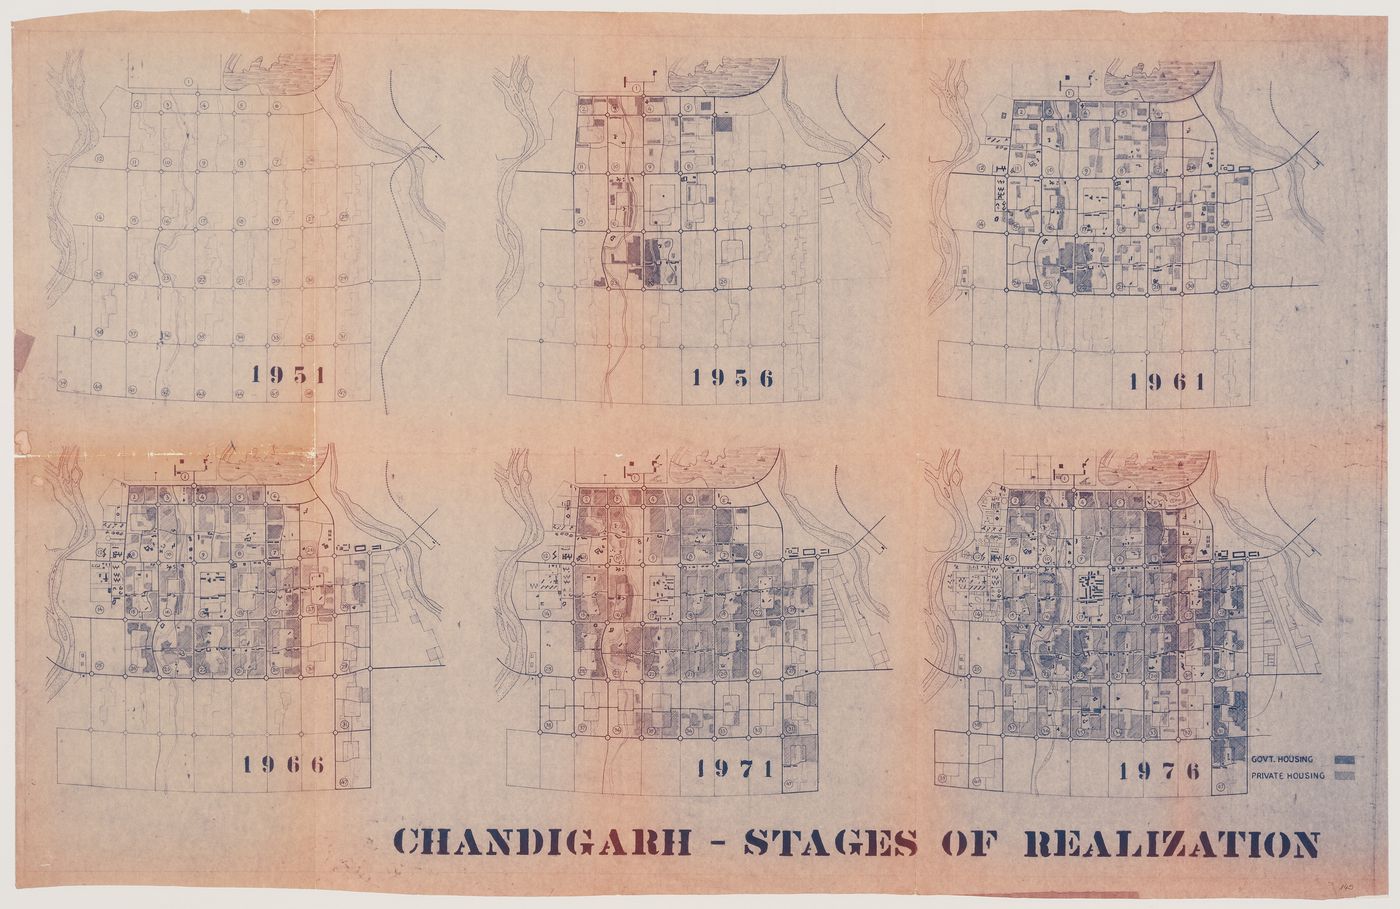 Plans showing six phases of realization of the urban plan for Chandigarh, India, 1951-1976